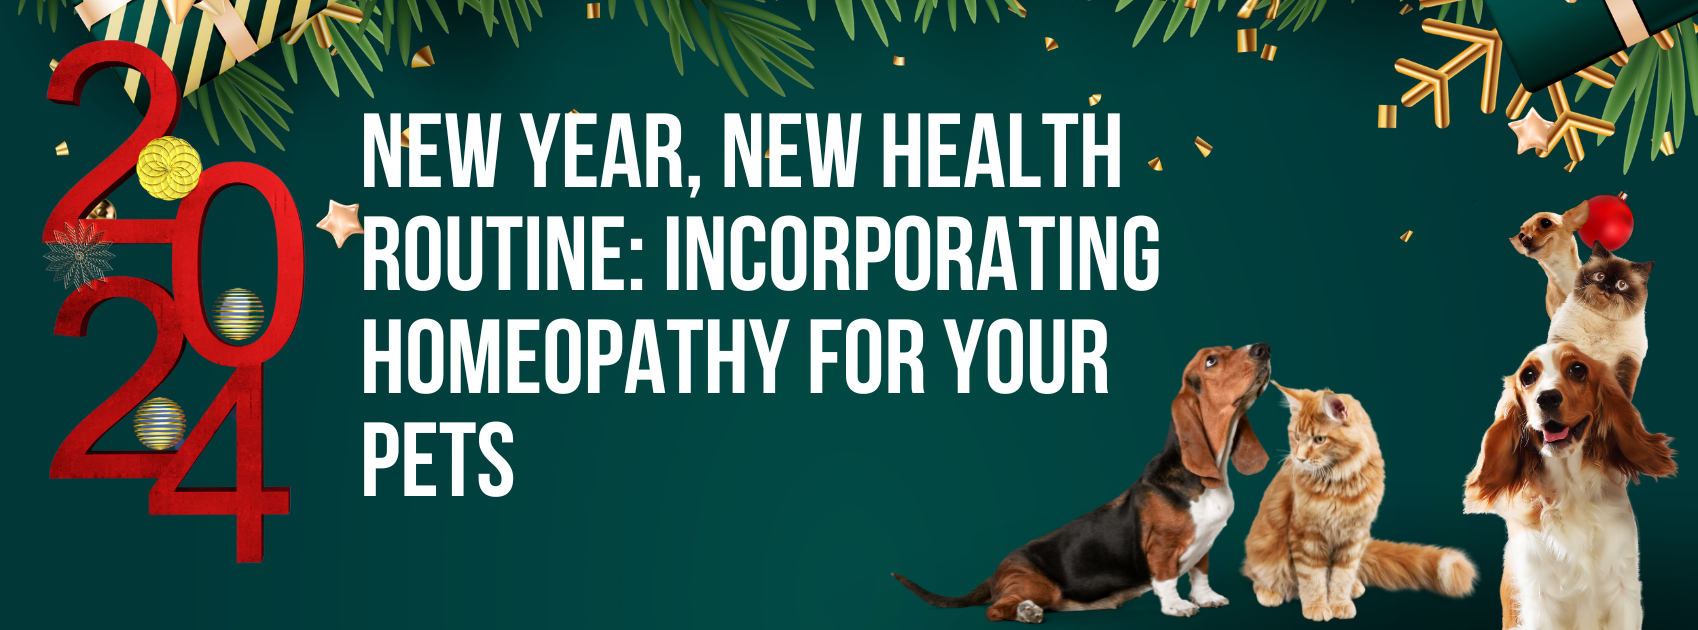 New Year, New Health Routine: Incorporating Homeopathy for Your Pets